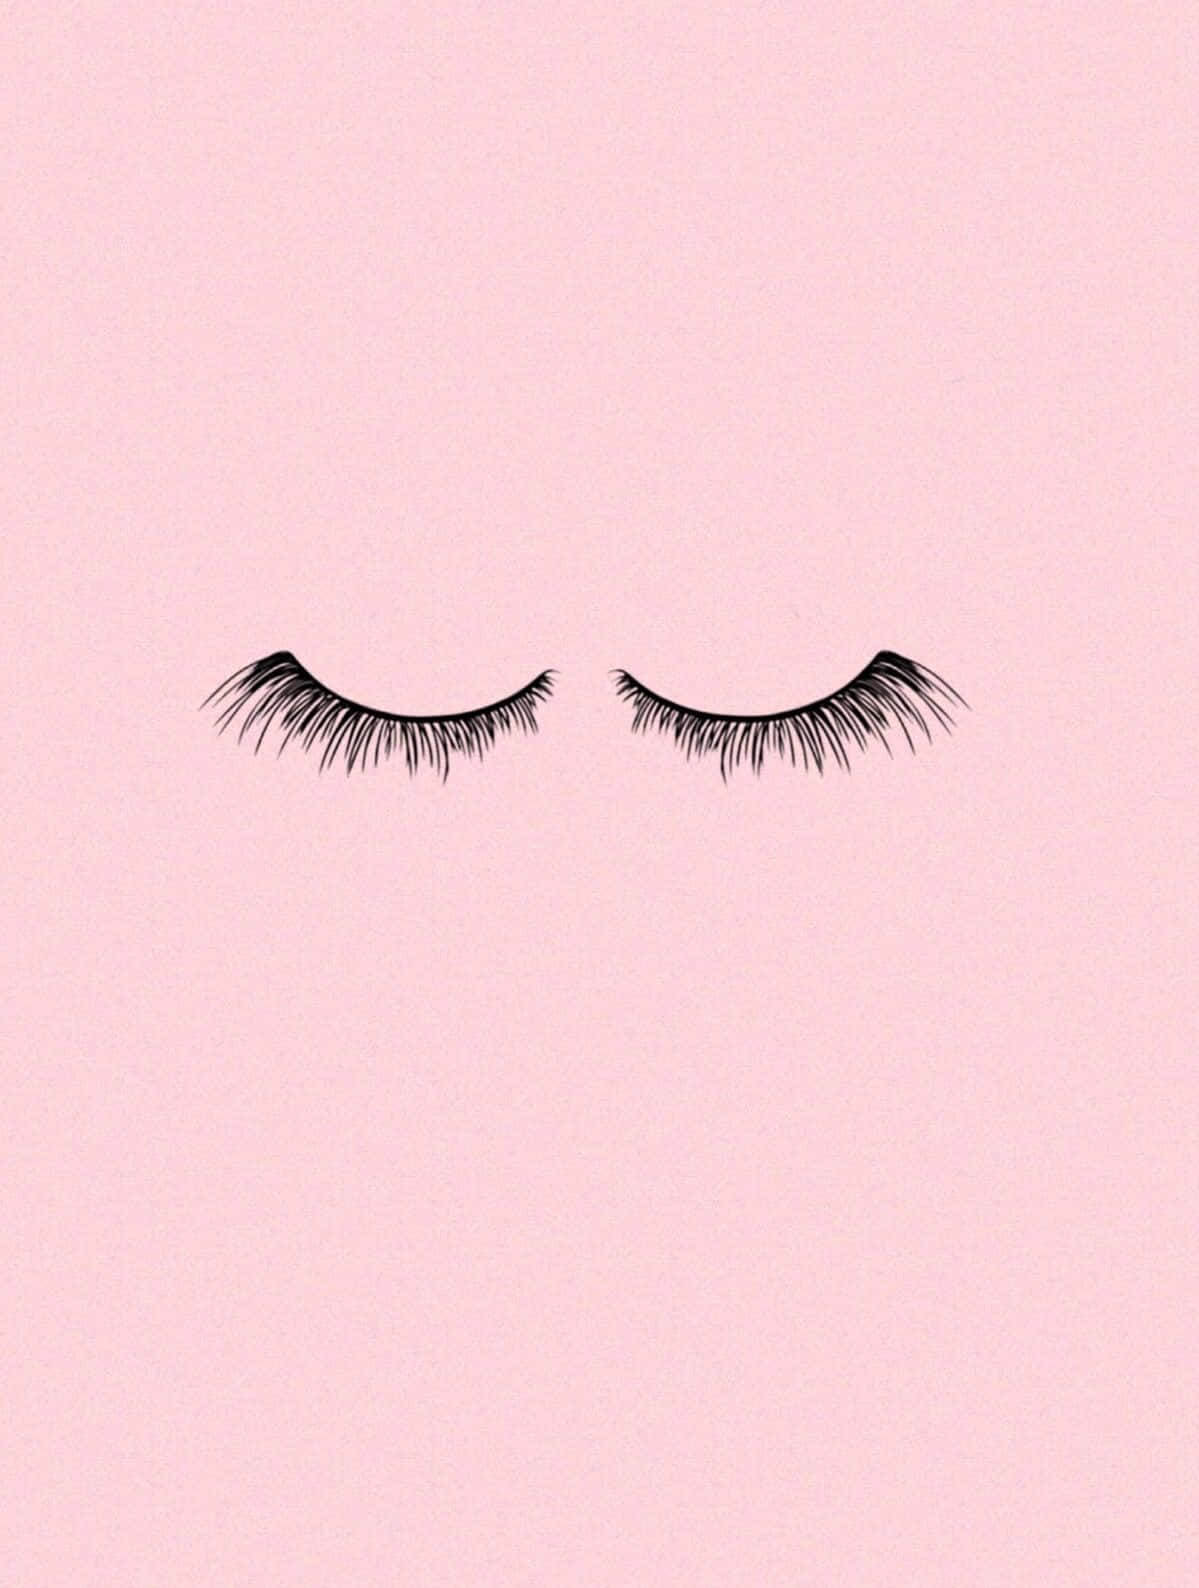 A Pink Background With A Black Eye With Lashes Wallpaper